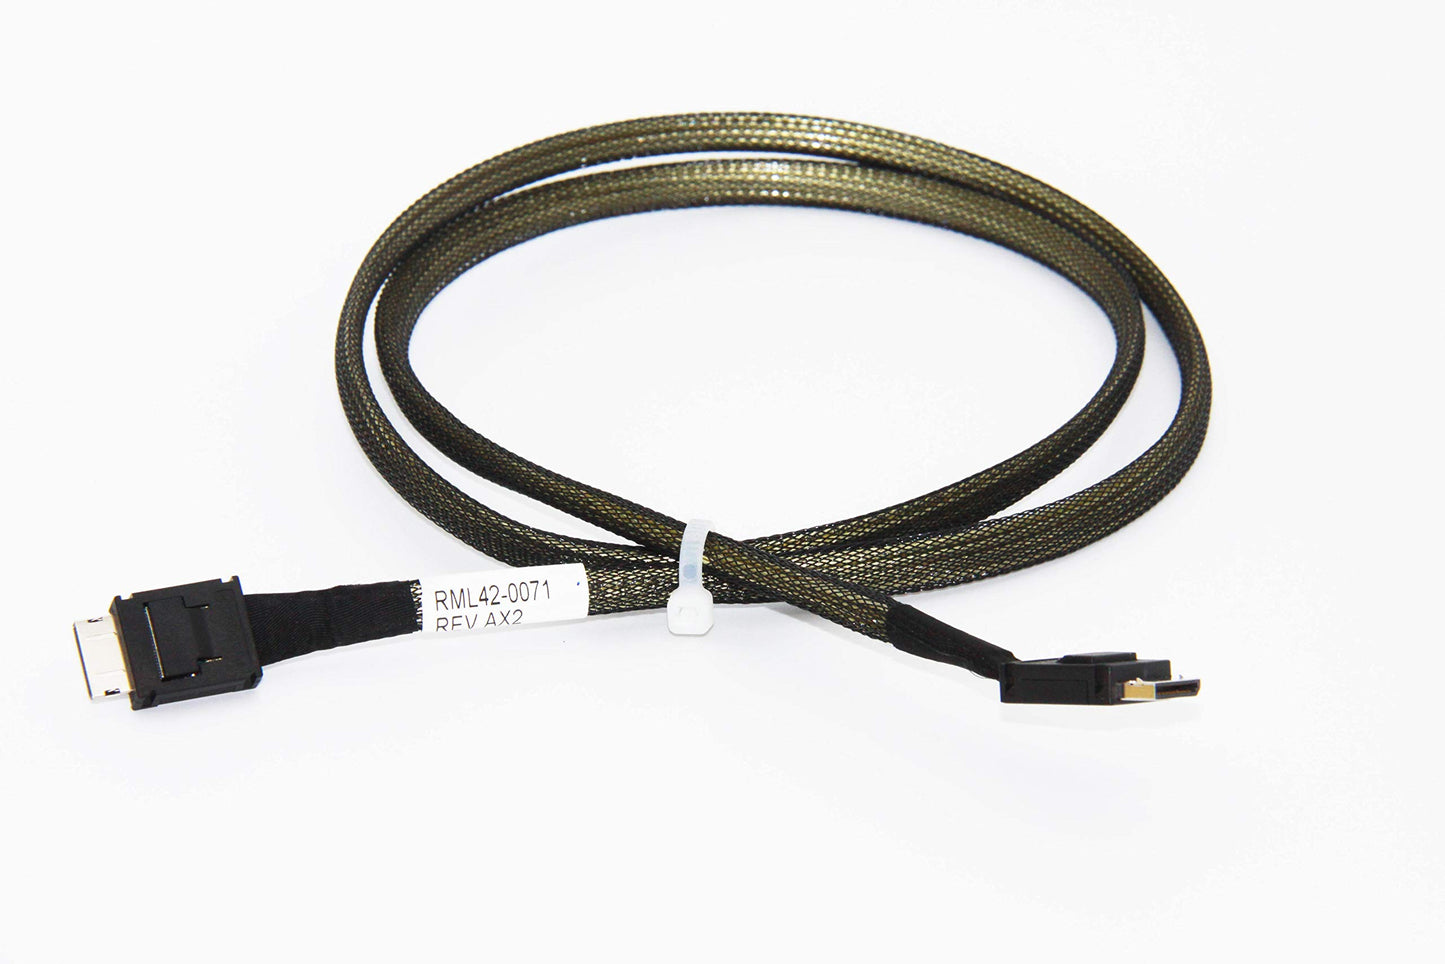 DiLiVing OCulink 4X to OCulink 4X,SFF-8611 to SFF-8611 Cable 100cm